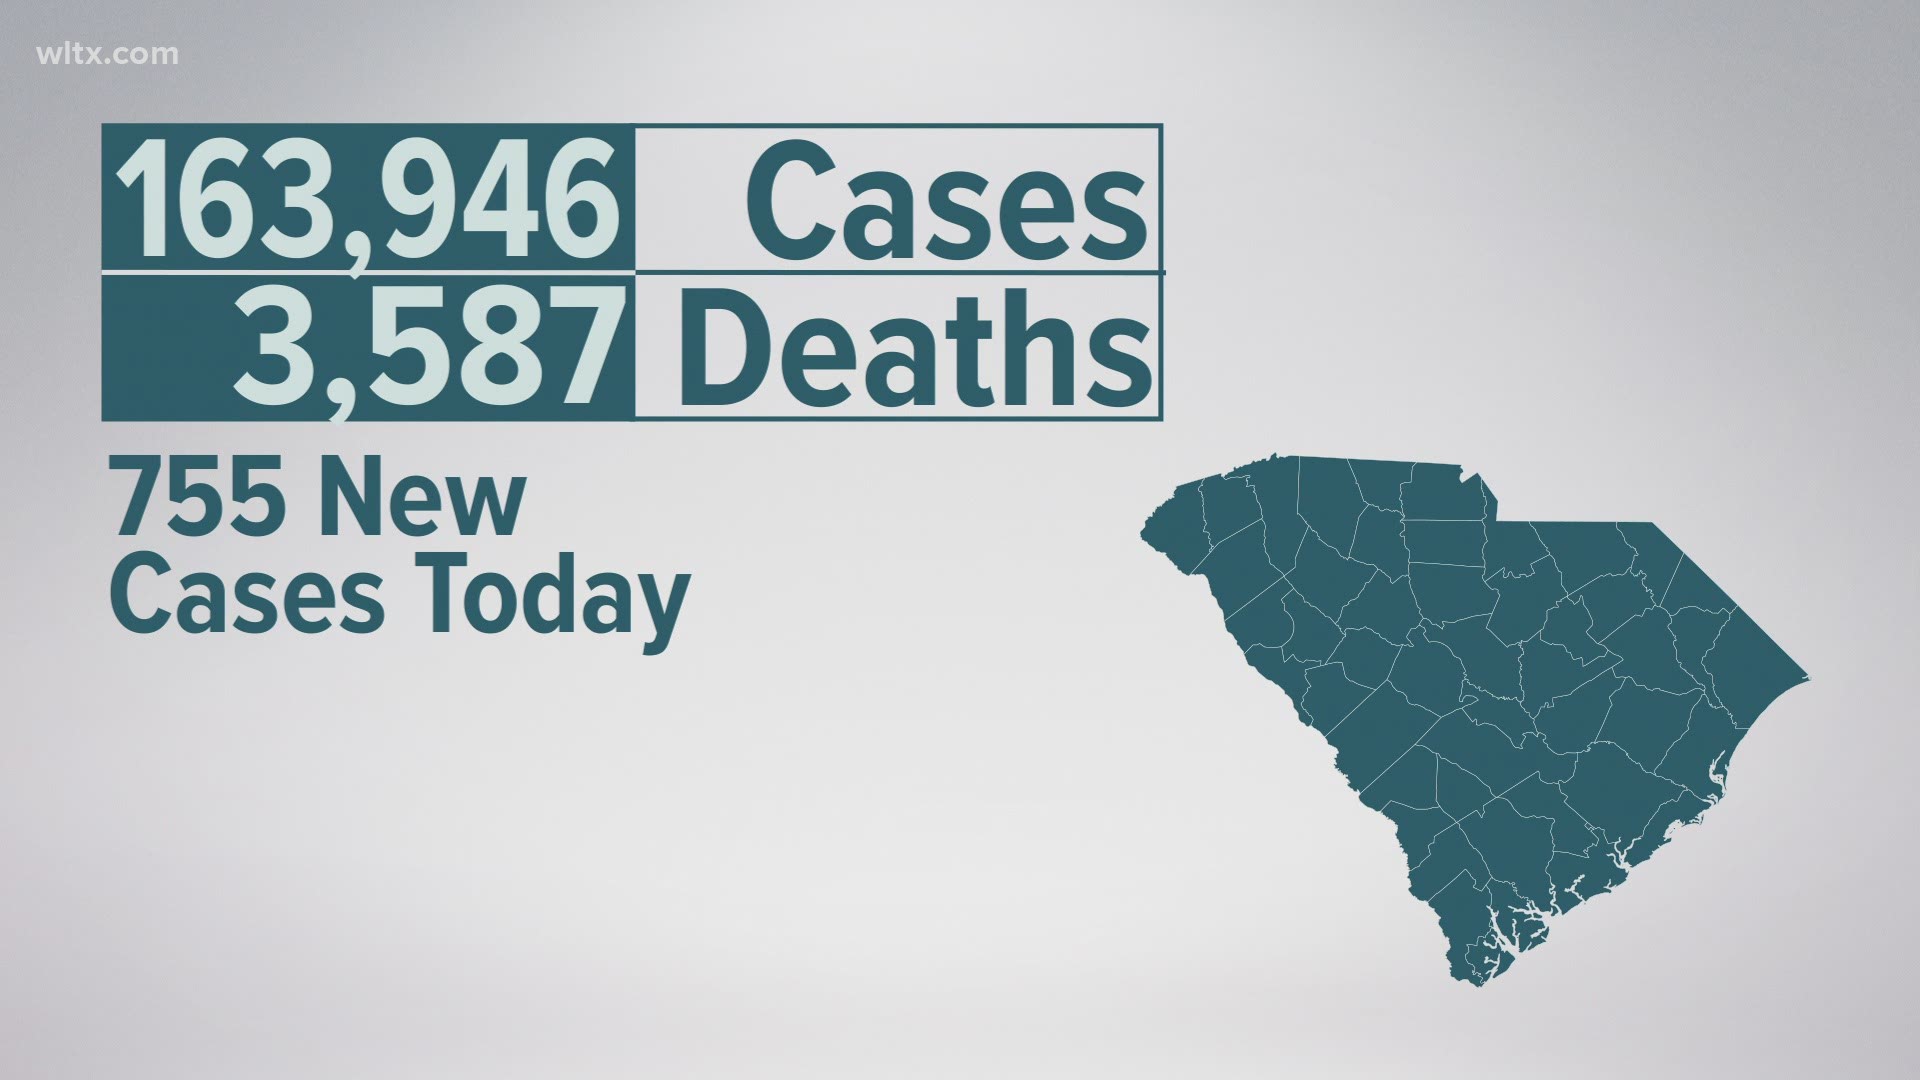 This brings the total number of confirmed cases to 163,946, probable cases to 7,555, confirmed deaths to 3,587, and 236 probable deaths